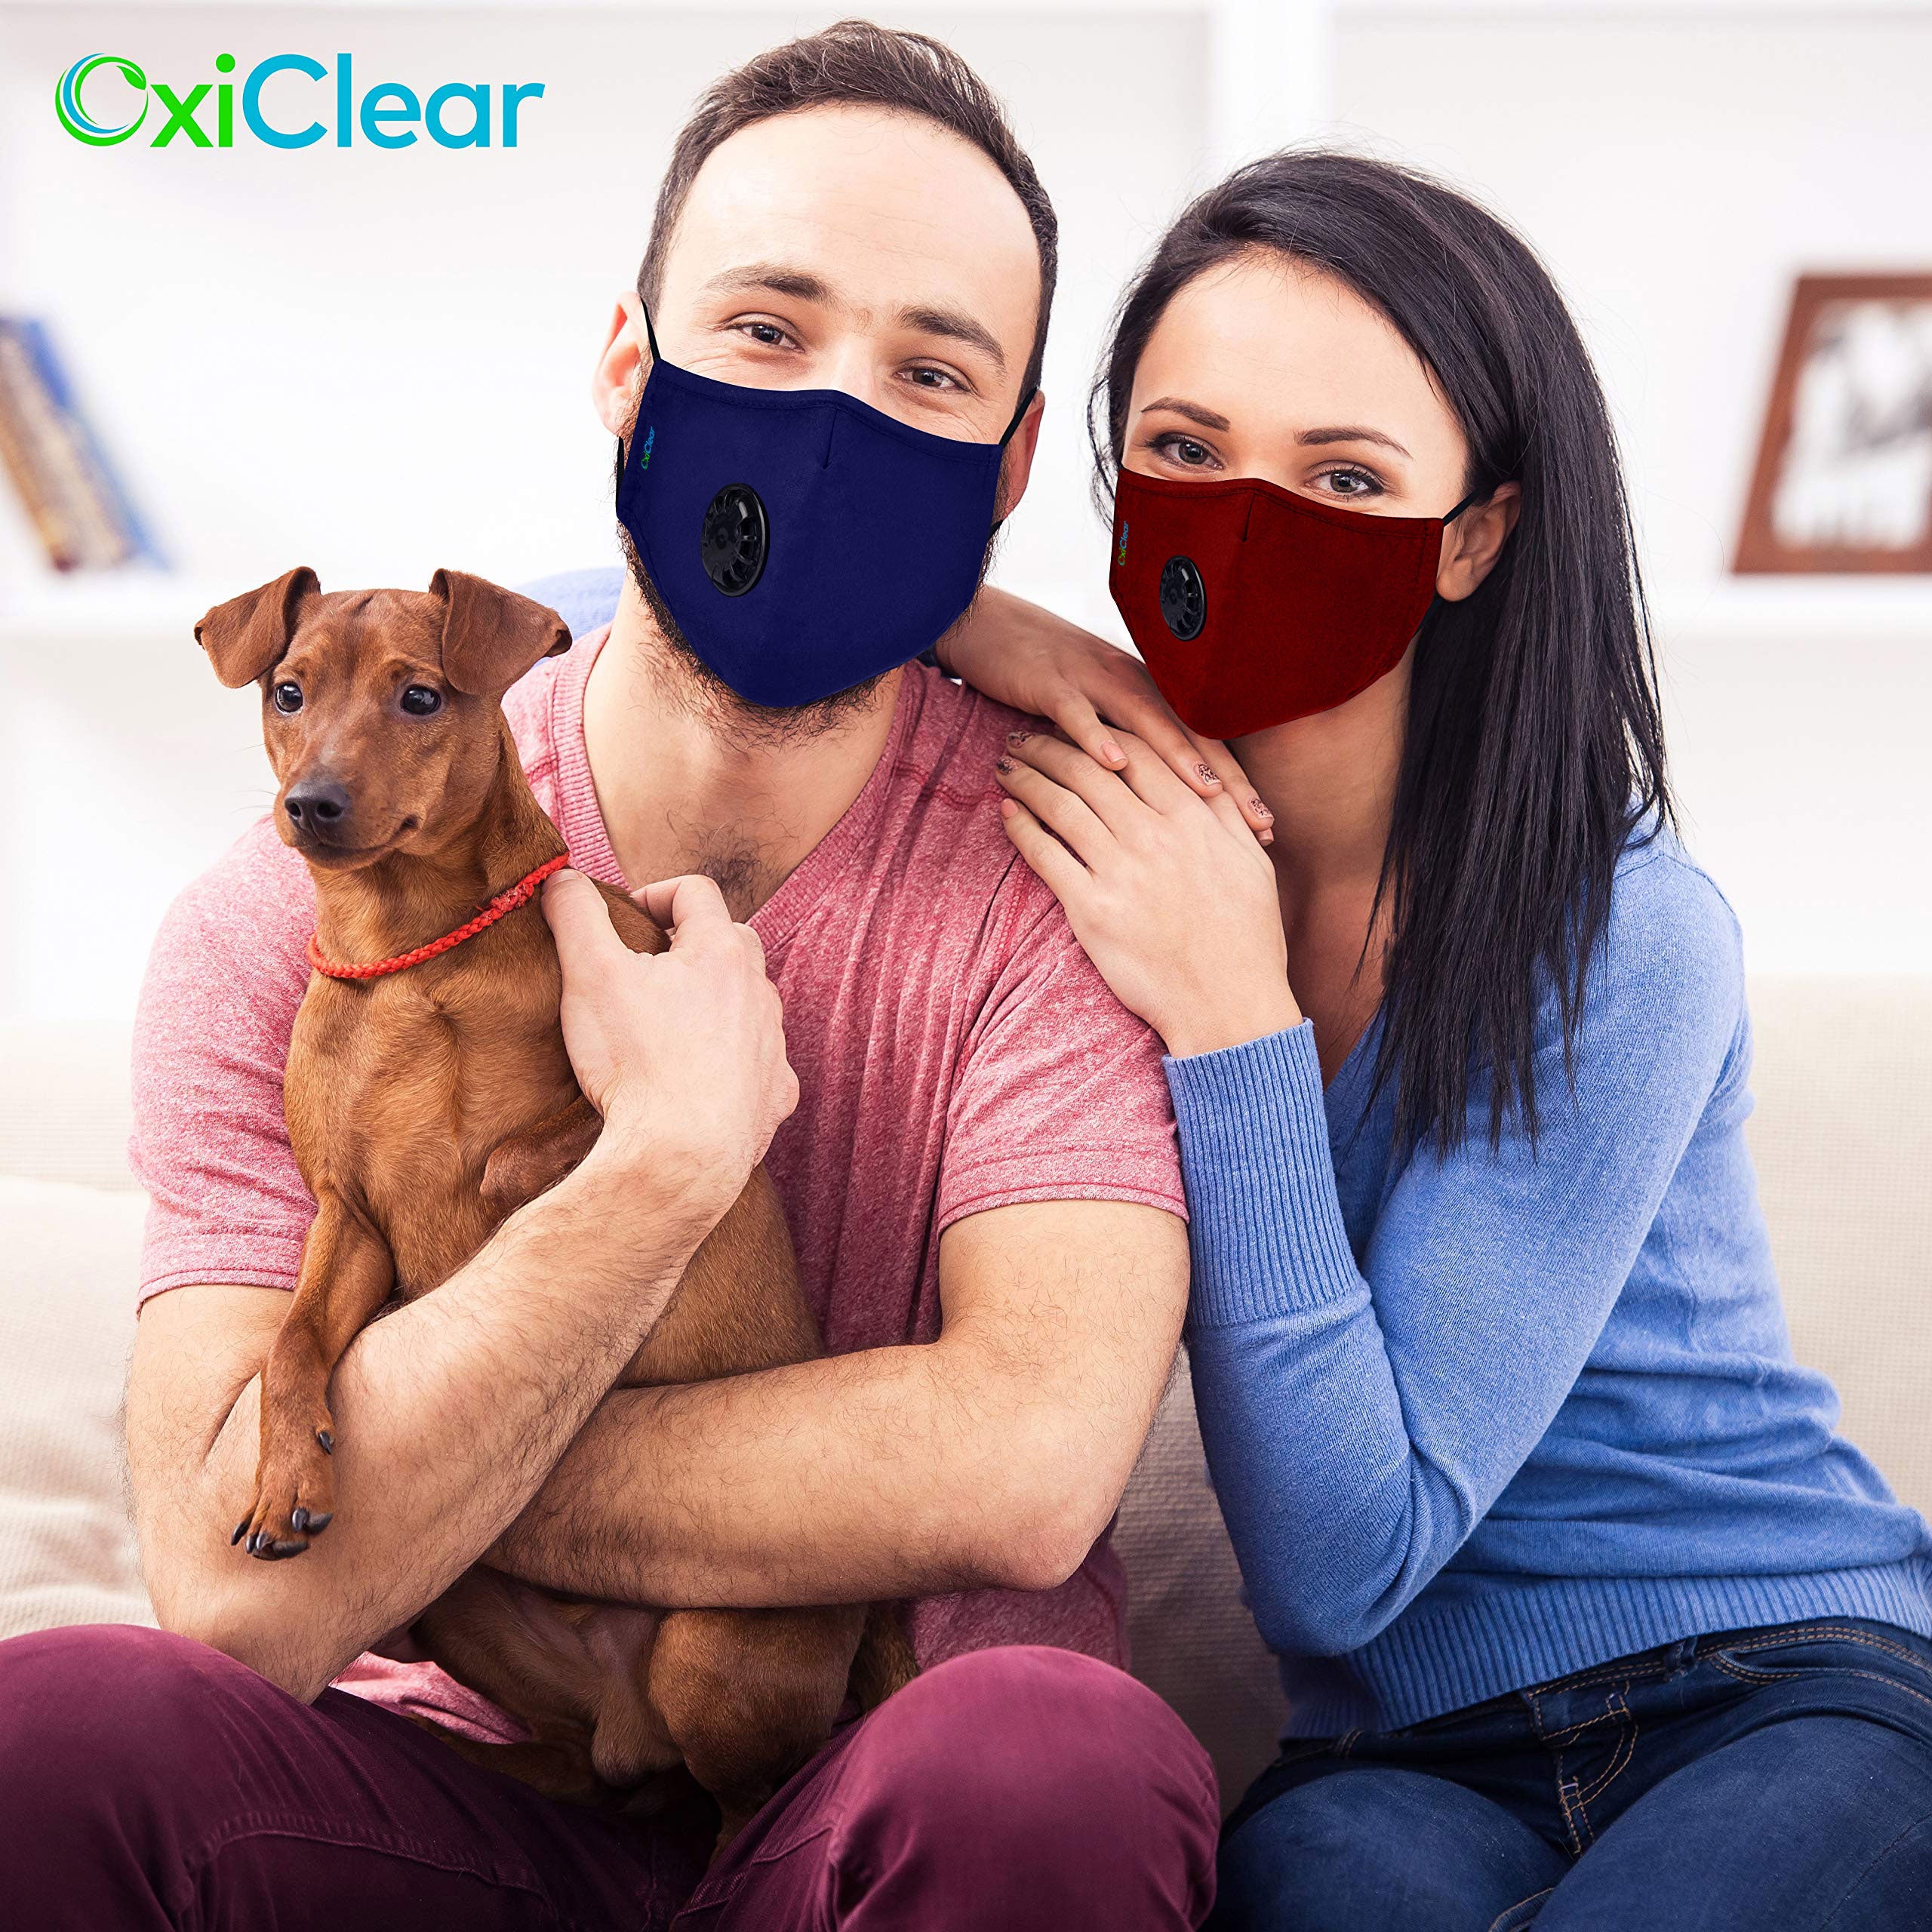 OxiClear N99 Pollution Mask With Carbon Filters Reusable D.R.D.O Certified (Multicolour Dark - Pack of 3)